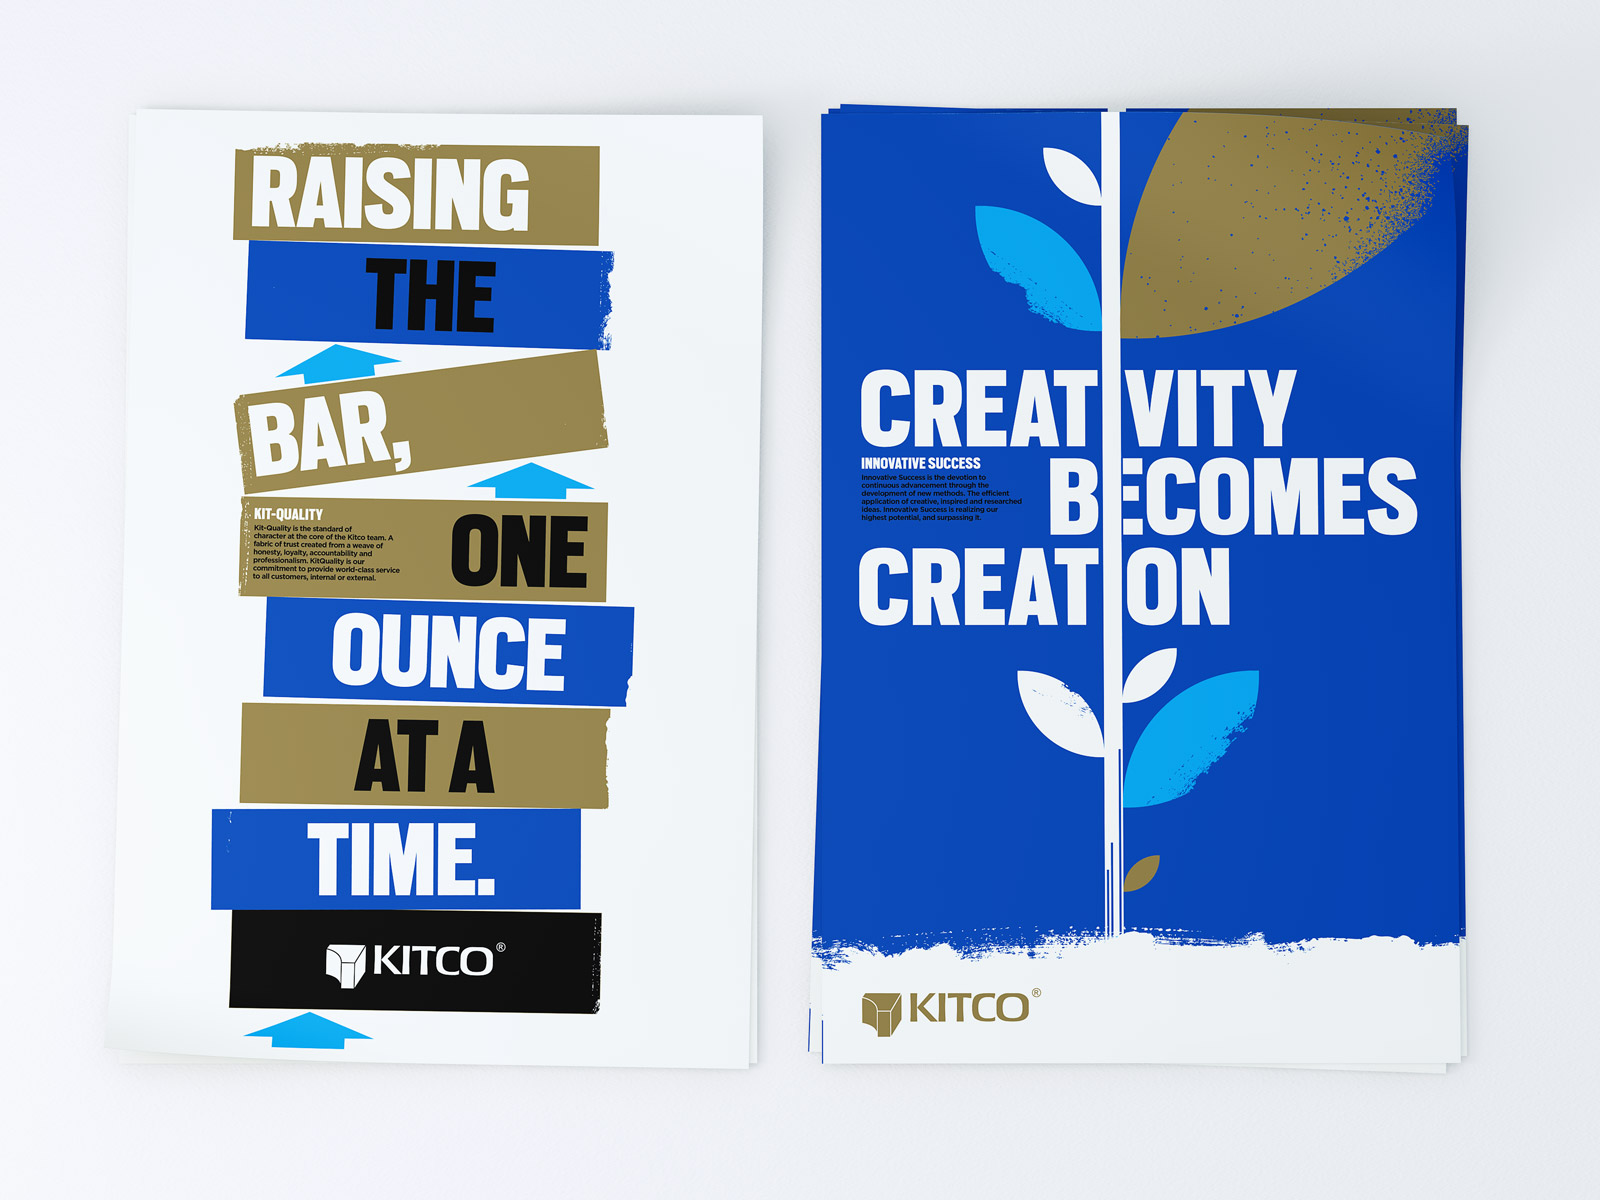 Inspirational brand posters for Kitco by Peter Sunna